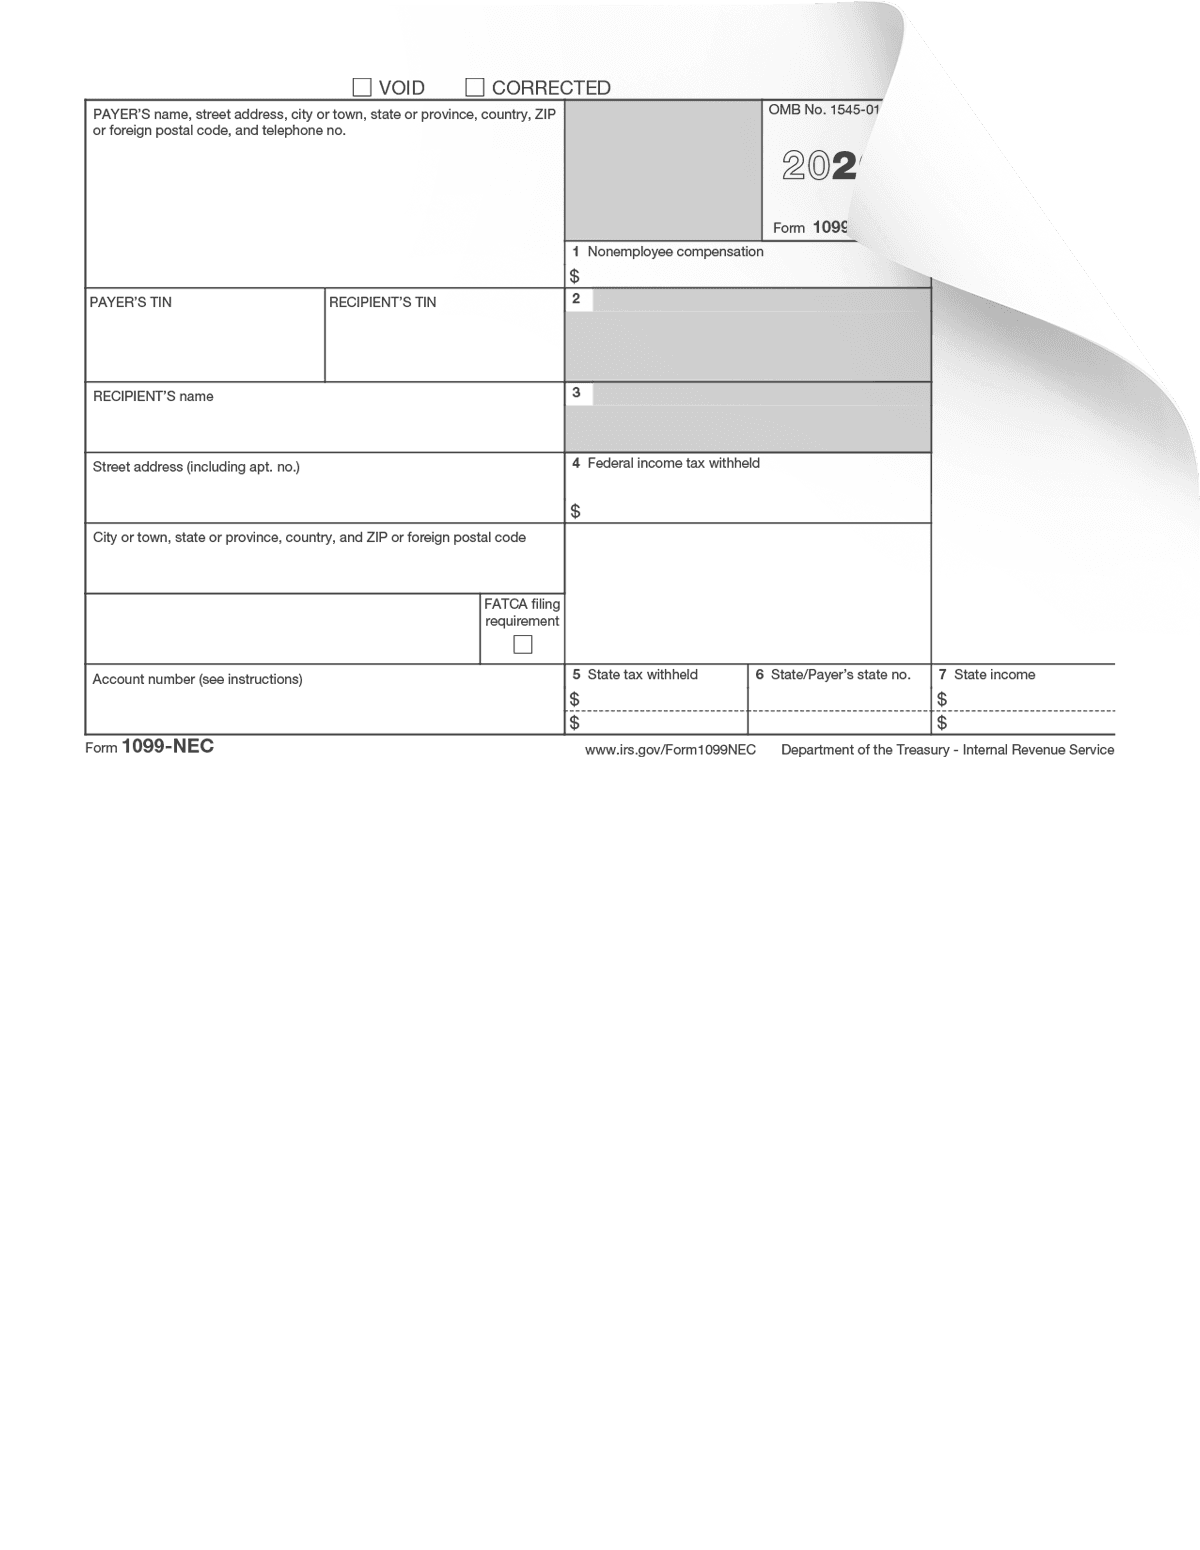 50 Sheets, 2 Forms Per Sheet Blue Summit Supplies 1099 NEC Copy A Forms 2020 Copy A ONLY New Tax Forms for Reporting Nonemployee Compensation for Independent Contractors 100 Pack 100 Pack 